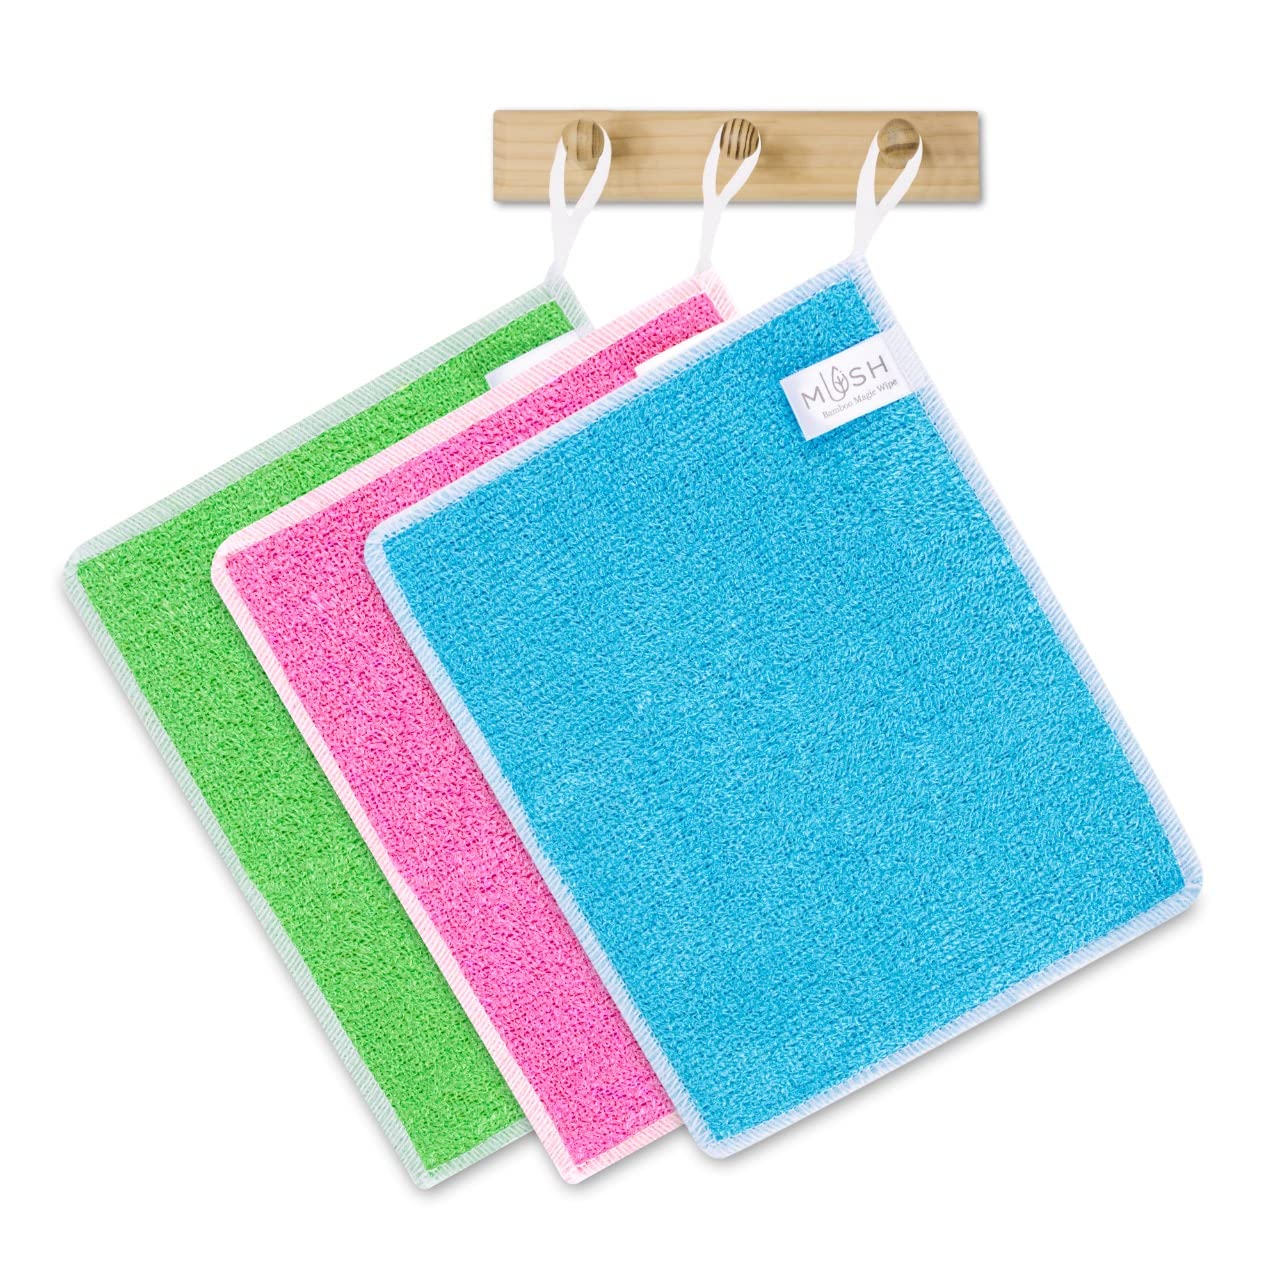 Mush Bamboo Super Absorbent, Anti Odor, Lint and Streak Free Reusable Cleaning Cloth - Multipurpose Wash Cloth for Kitchen, Car, Windows, Glass, Utensils, Furniture (200 GSM, Assorted, Pack of 3)